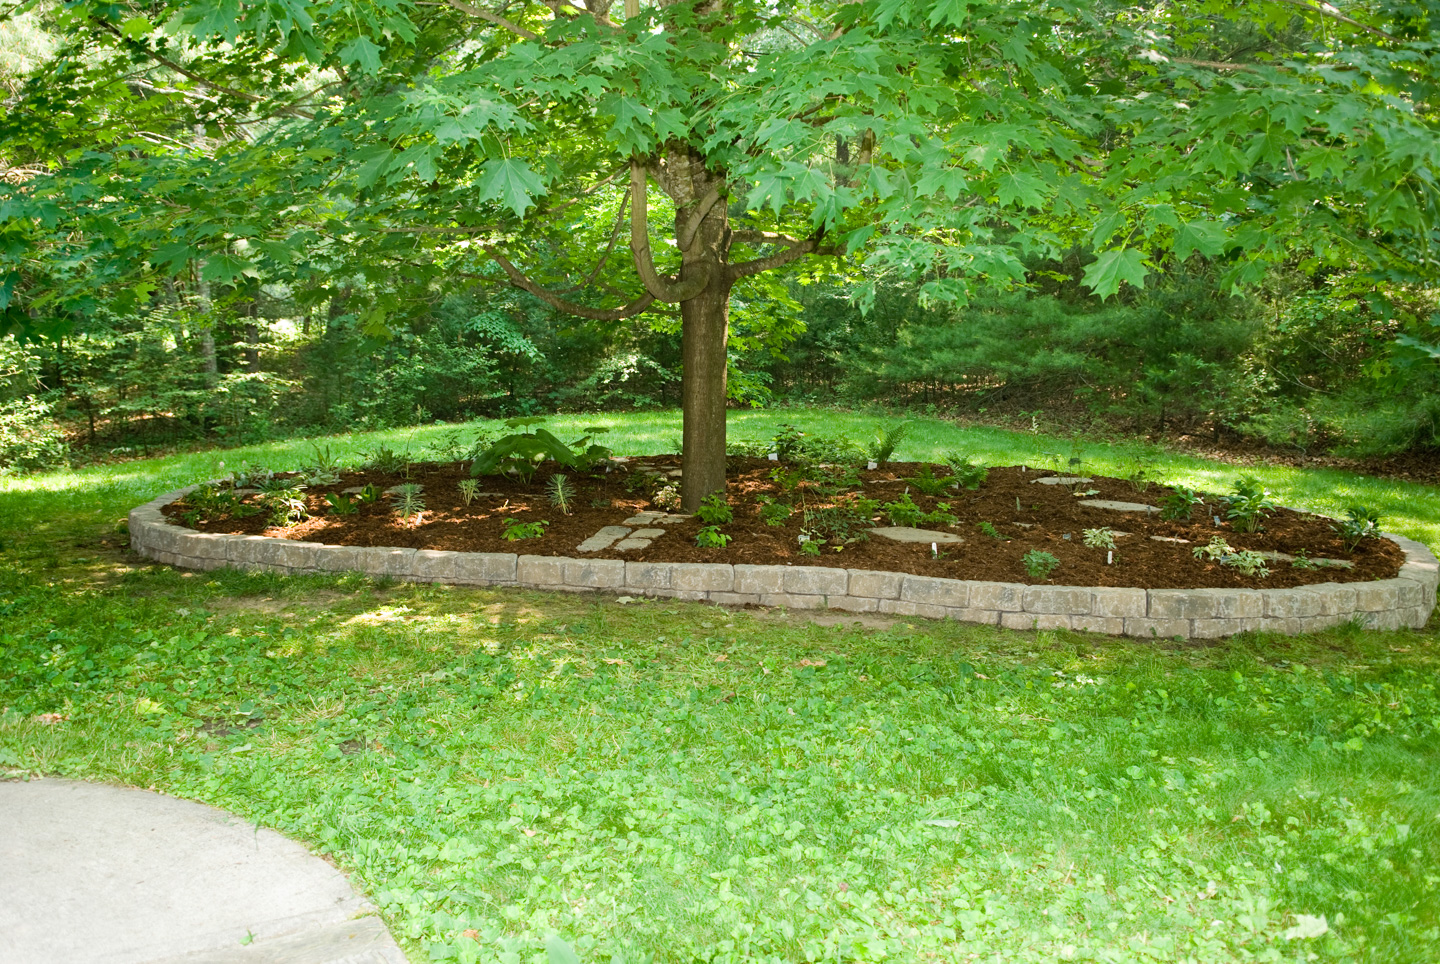 Shade garden with all plants in the ground